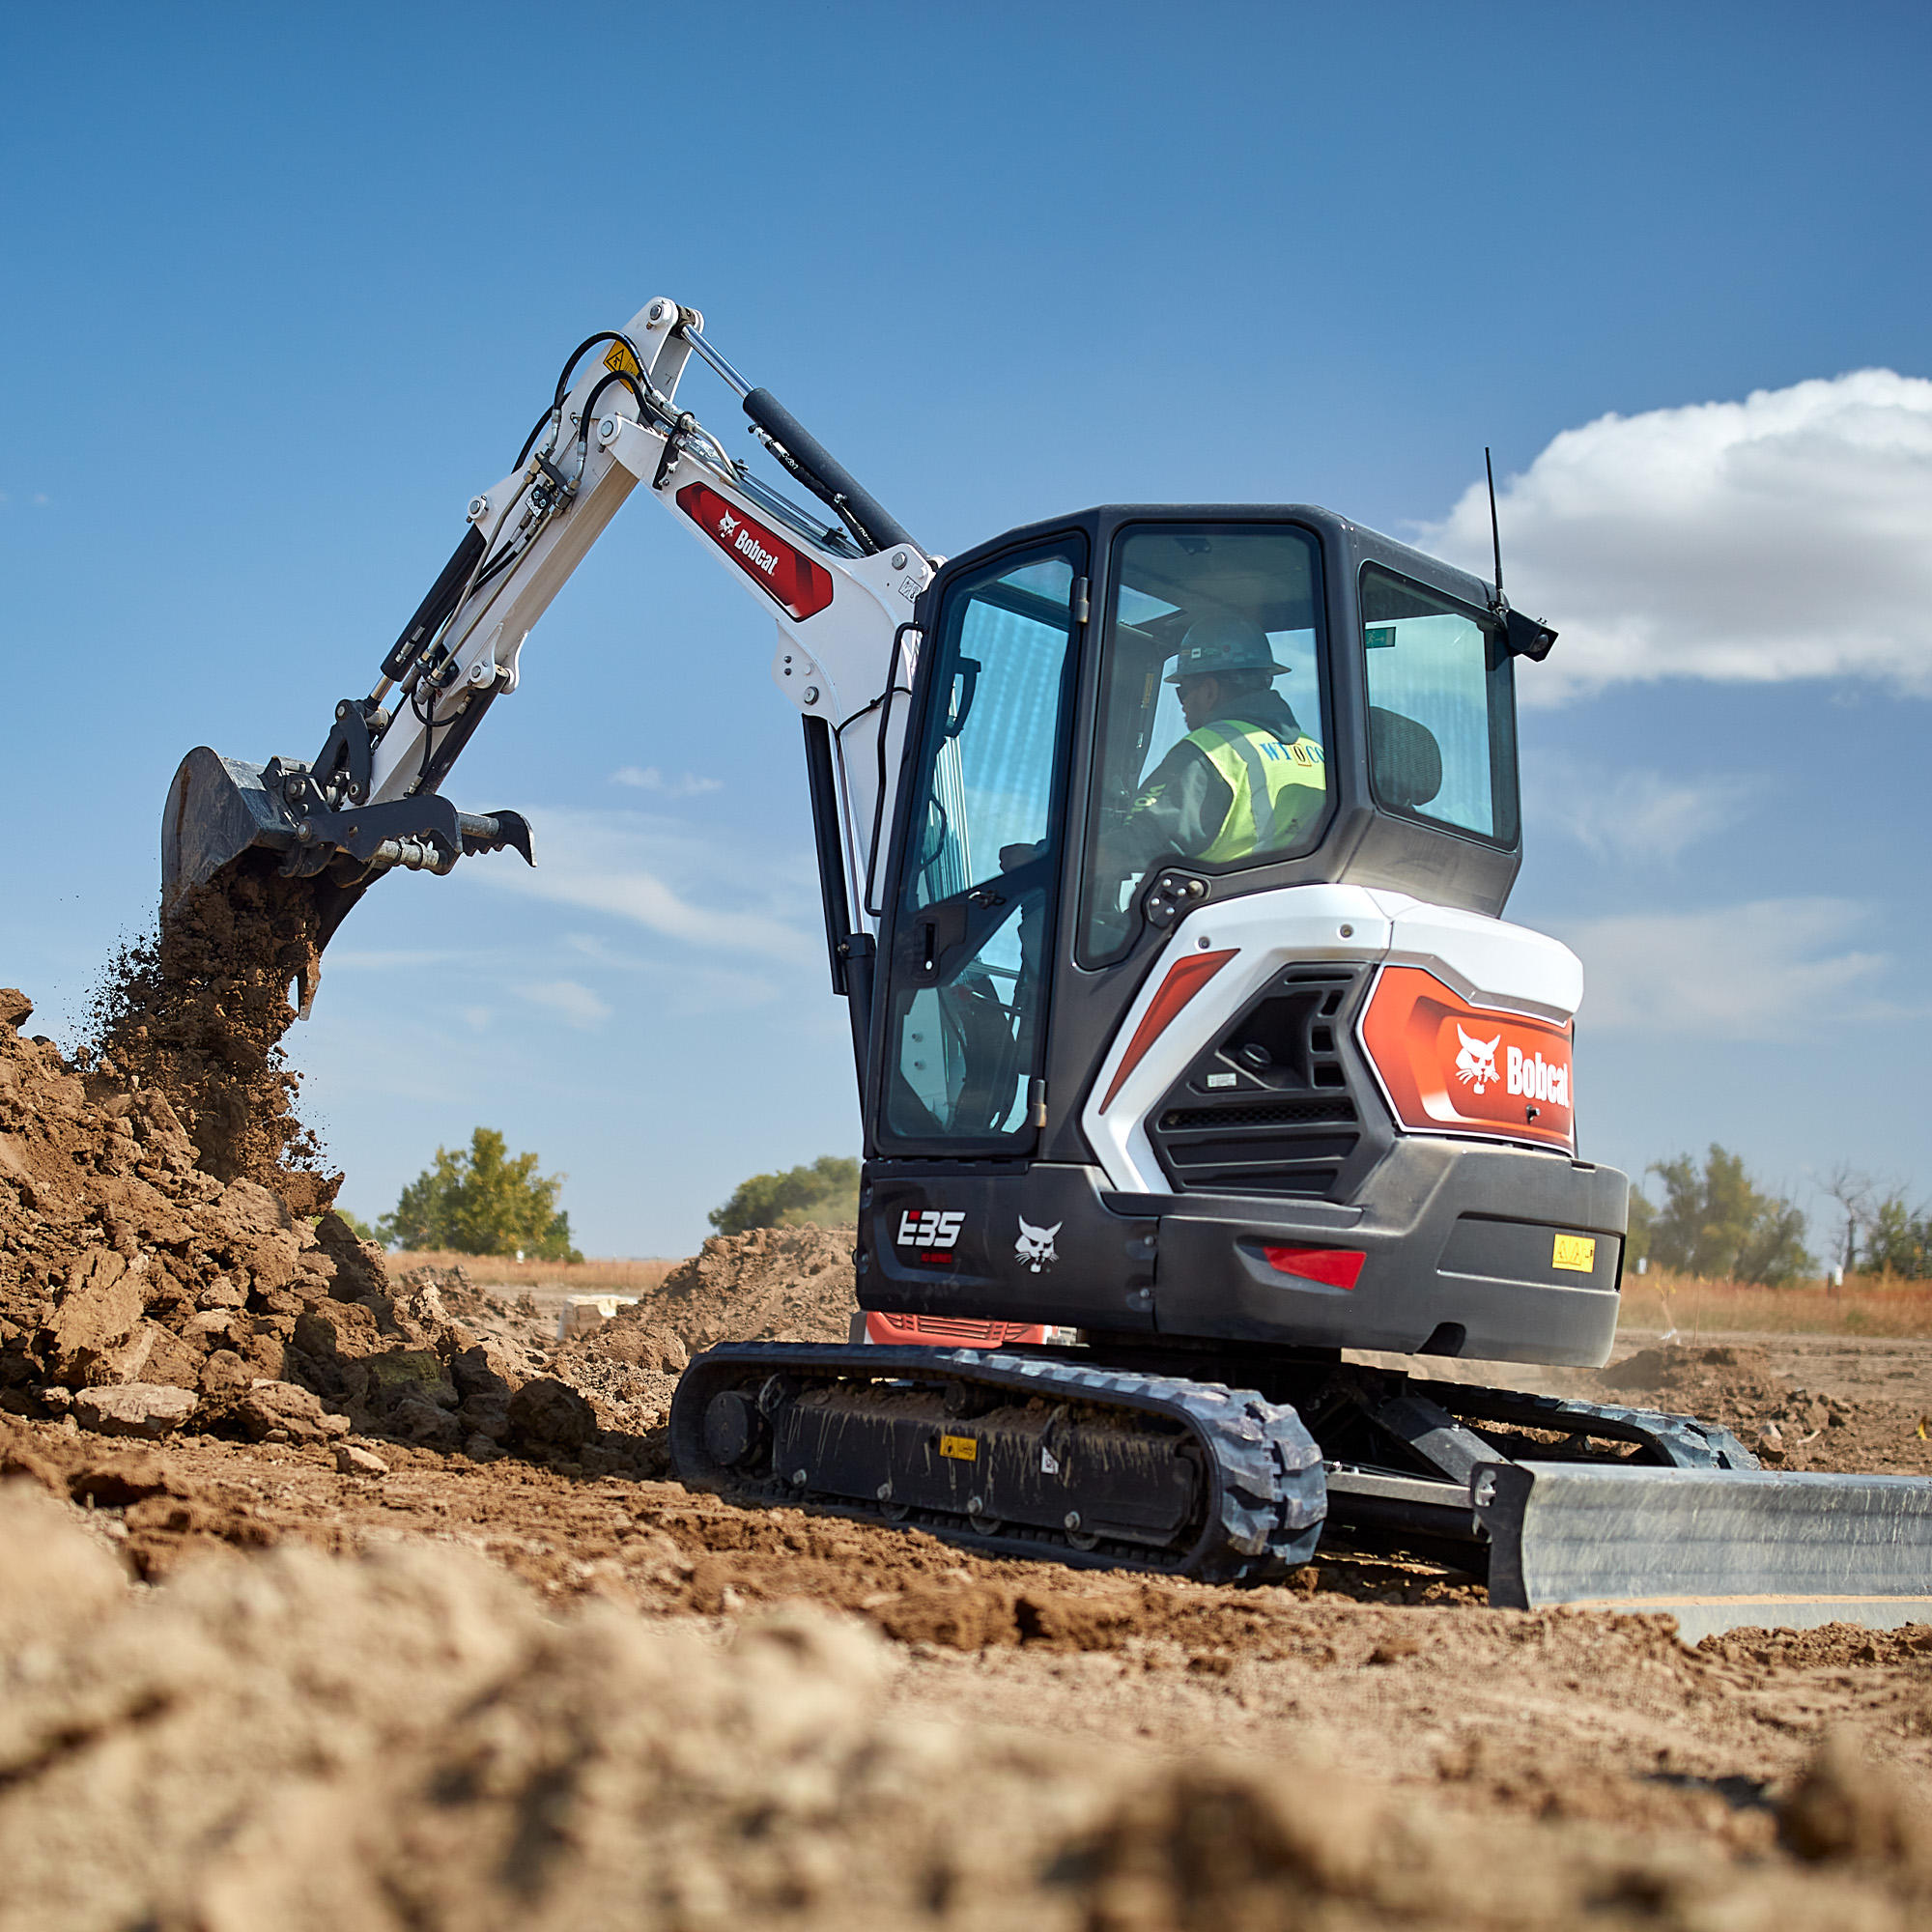 Bobcat E35 compact excavator with clamp and bucket Bobcat of Whitehorse Whitehorse (867)633-4426